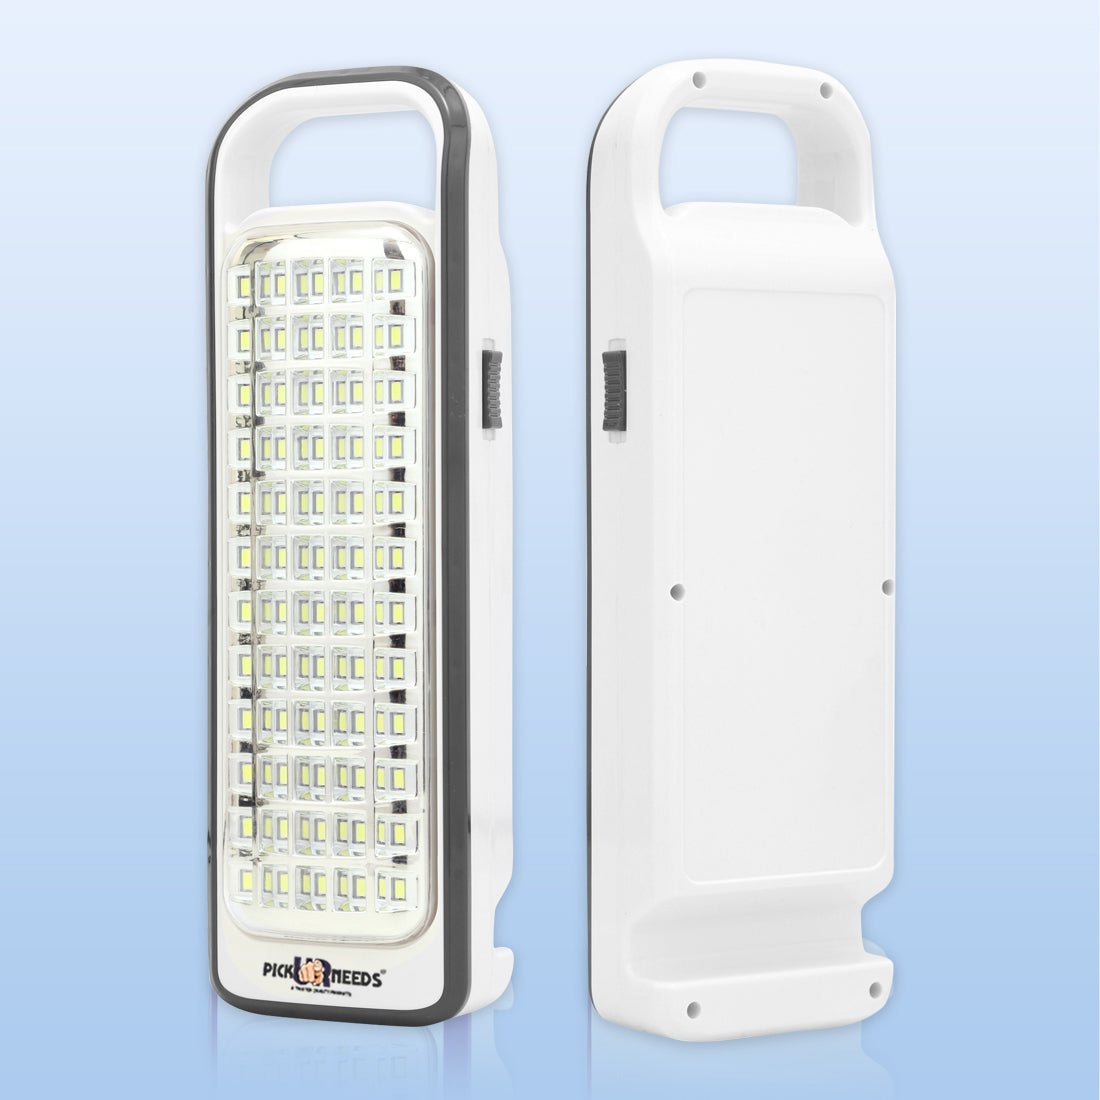 Pick Ur Needs Portable & Rechargeable Lantern Home Emergency Light Built-in 60-LED Bulbs